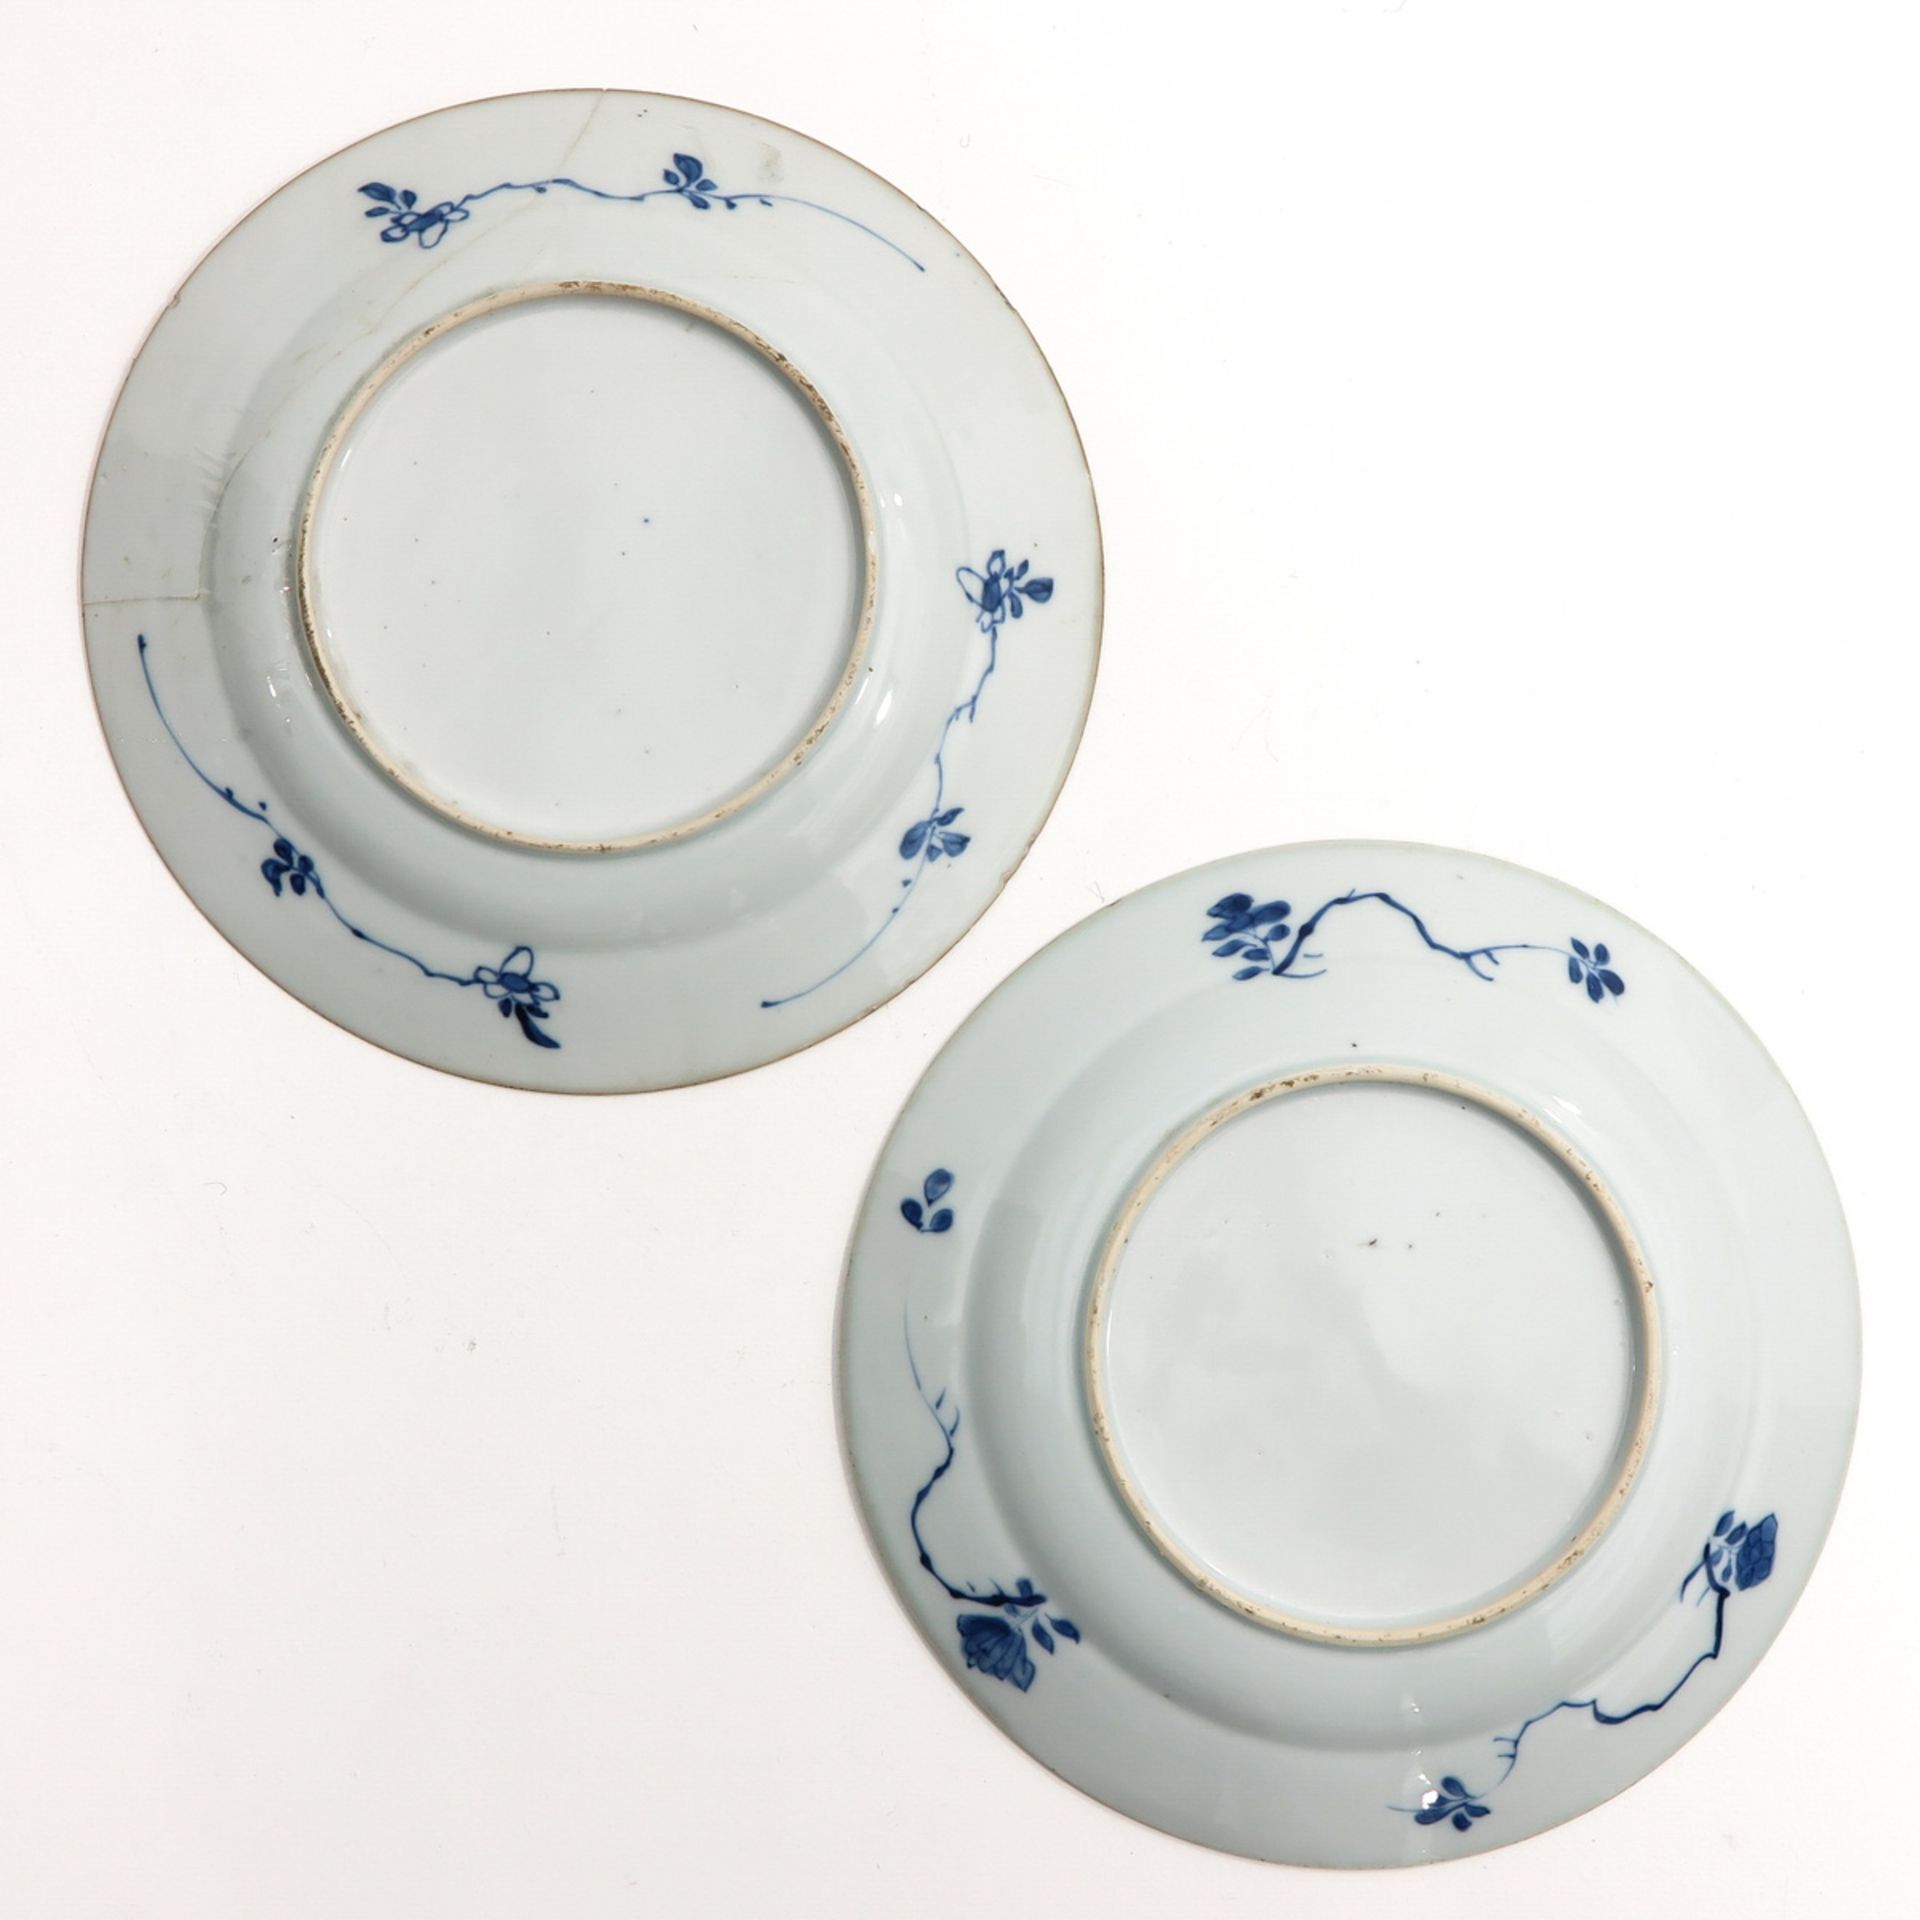 A Series of 4 Blue and white Plates - Image 4 of 9